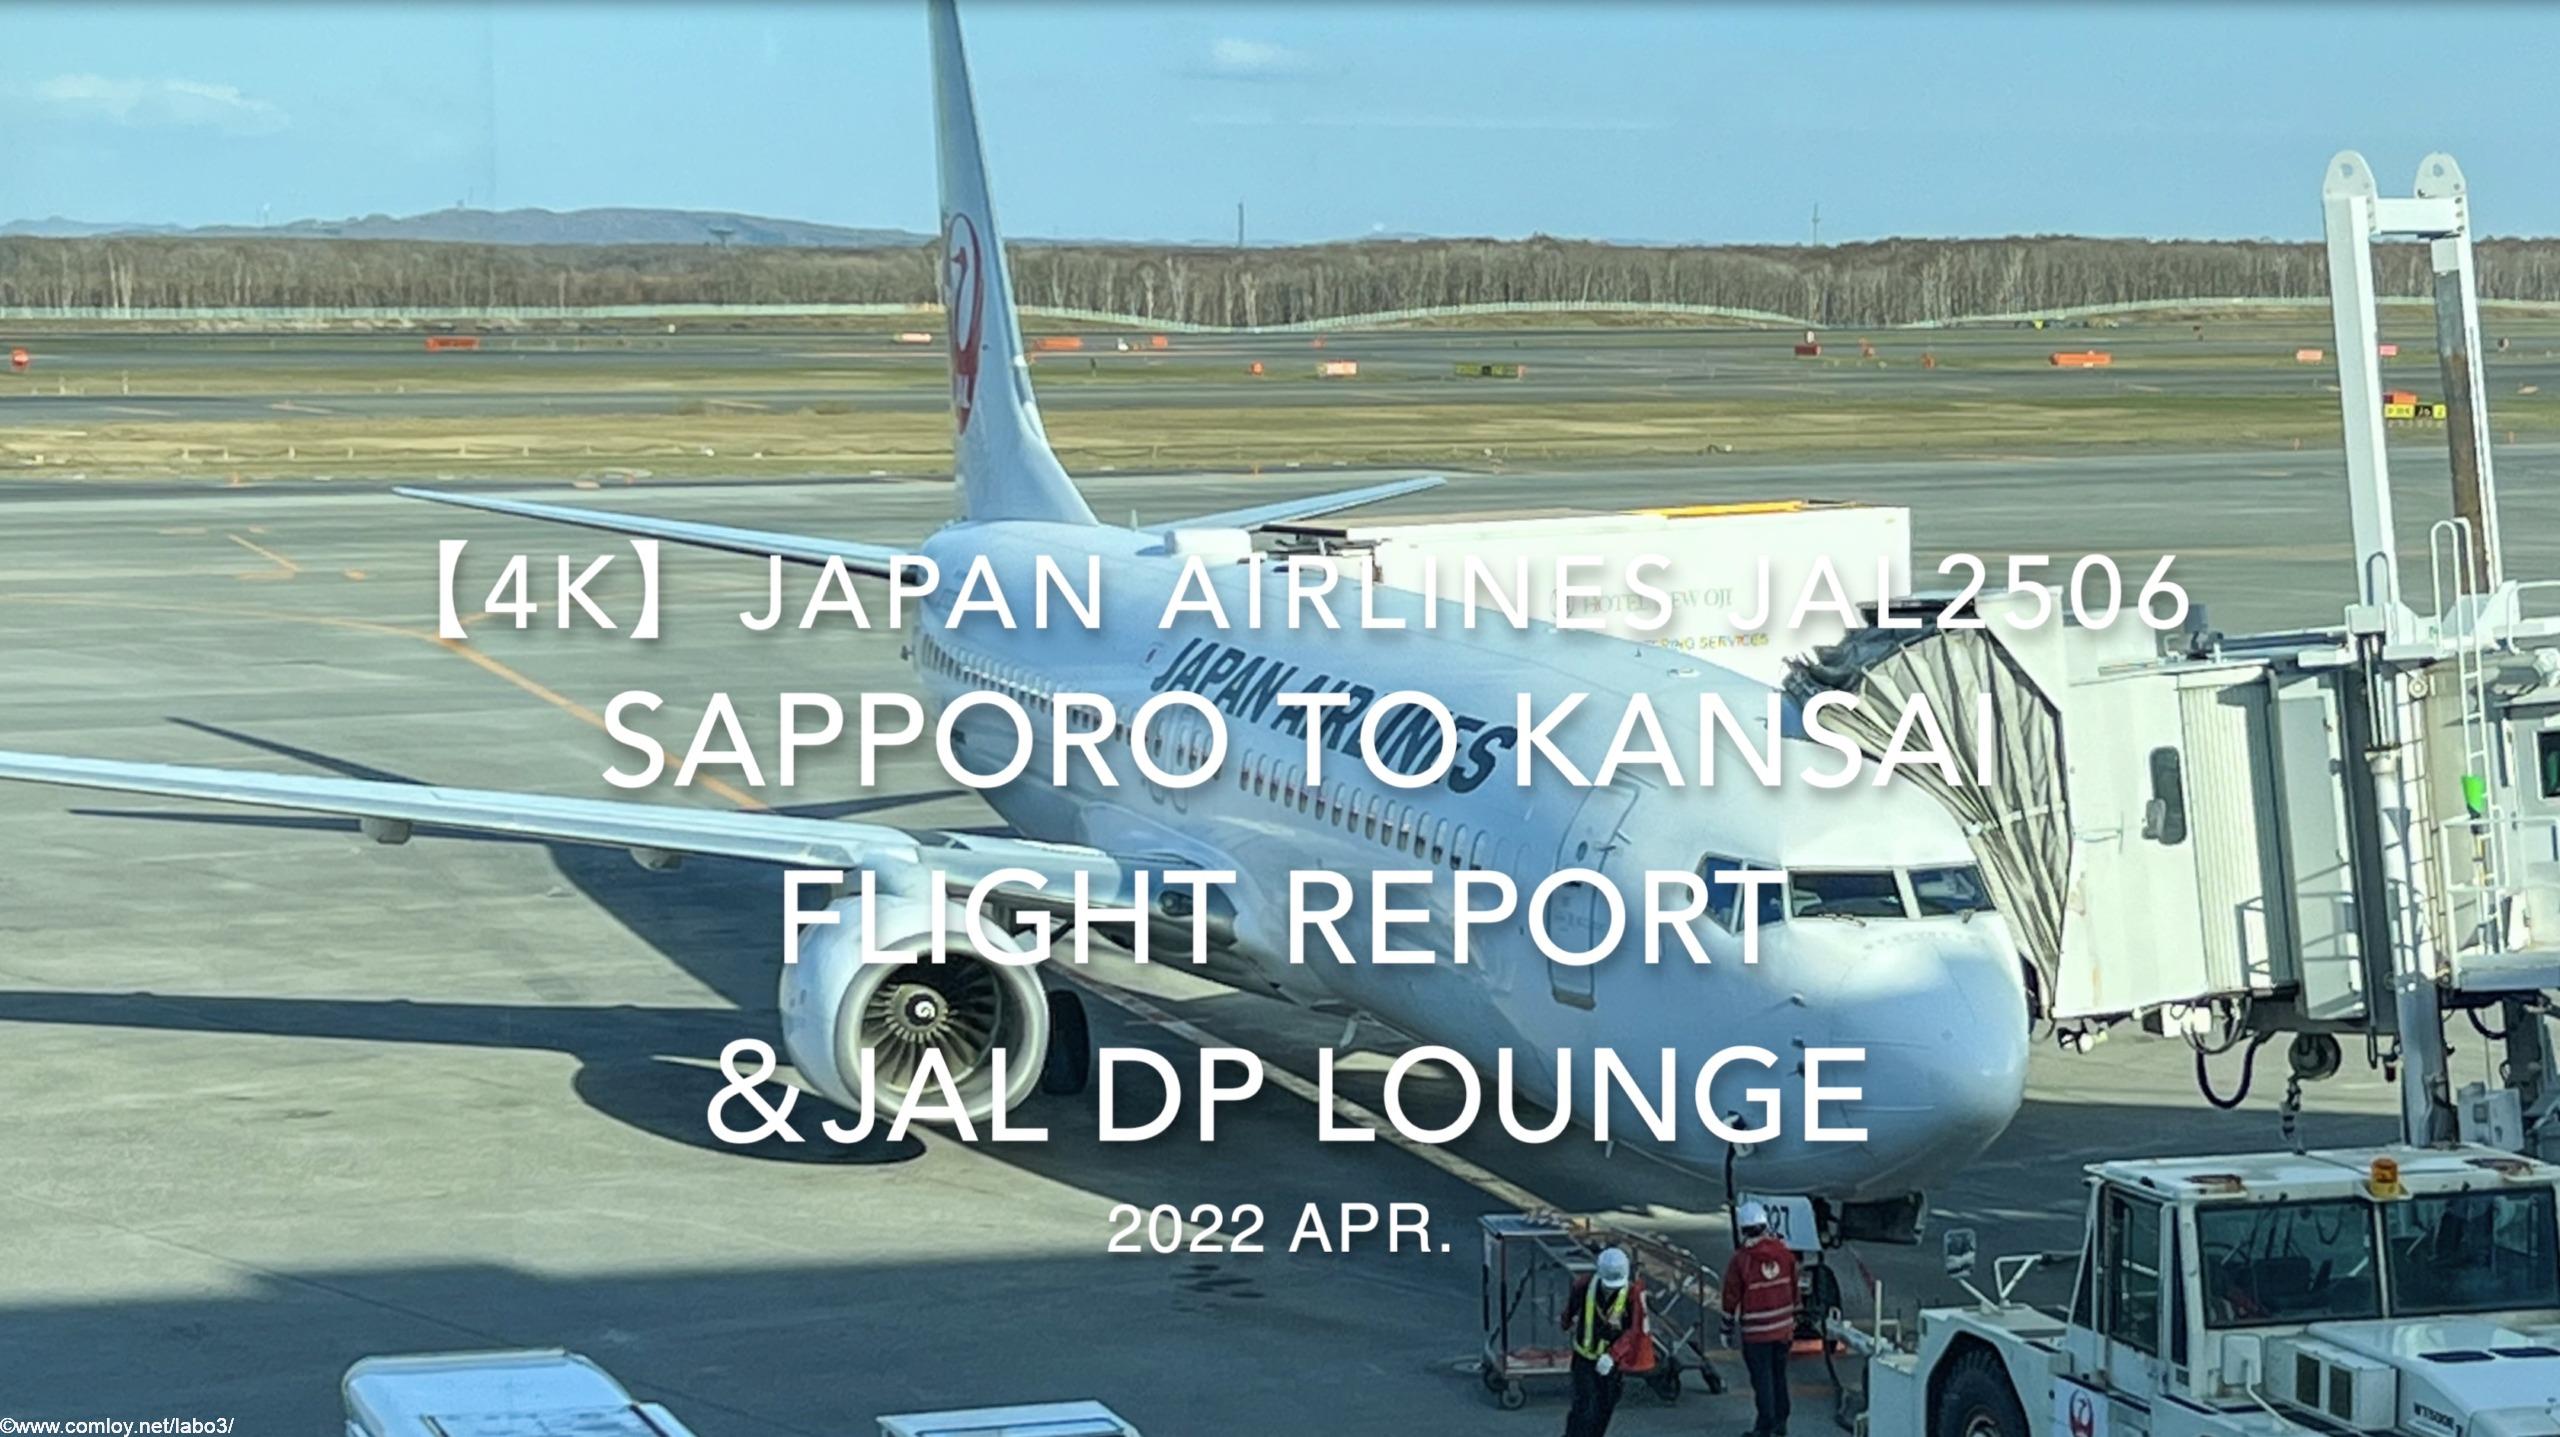 【Flight Report 4K】2022 Apr JAPAN AIRLINES JAL2506 SAPPORO to KANSAI 日本航空 新千歳 - 関西 搭乗記